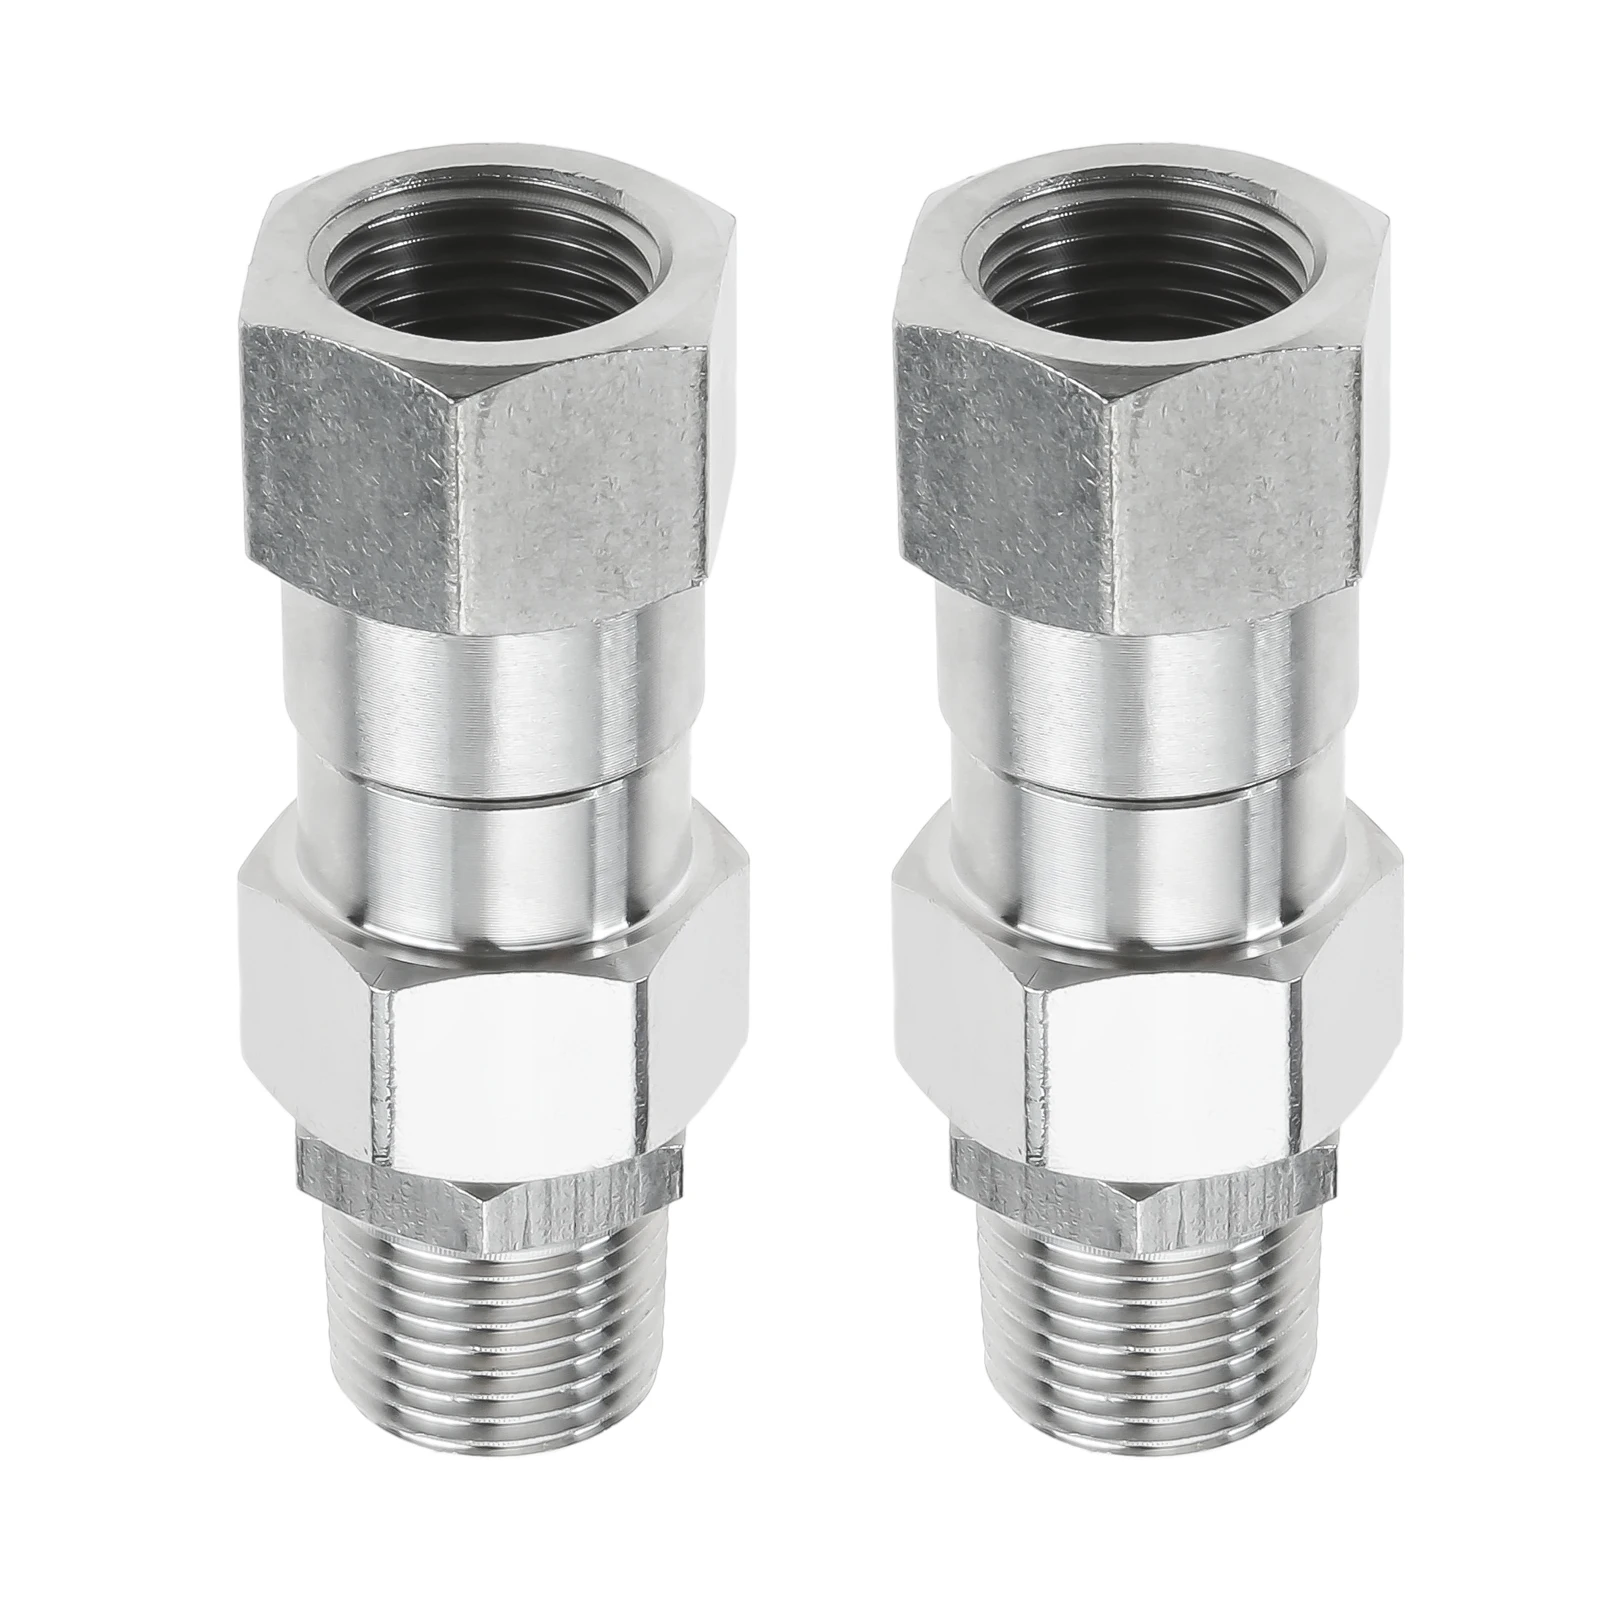 

2pcs/set Pressure Washer Swivel Joints Stainless Steel 3/8" NPT Female to Male Thread Fitting 360° Anti Twist Cold/Hot Water